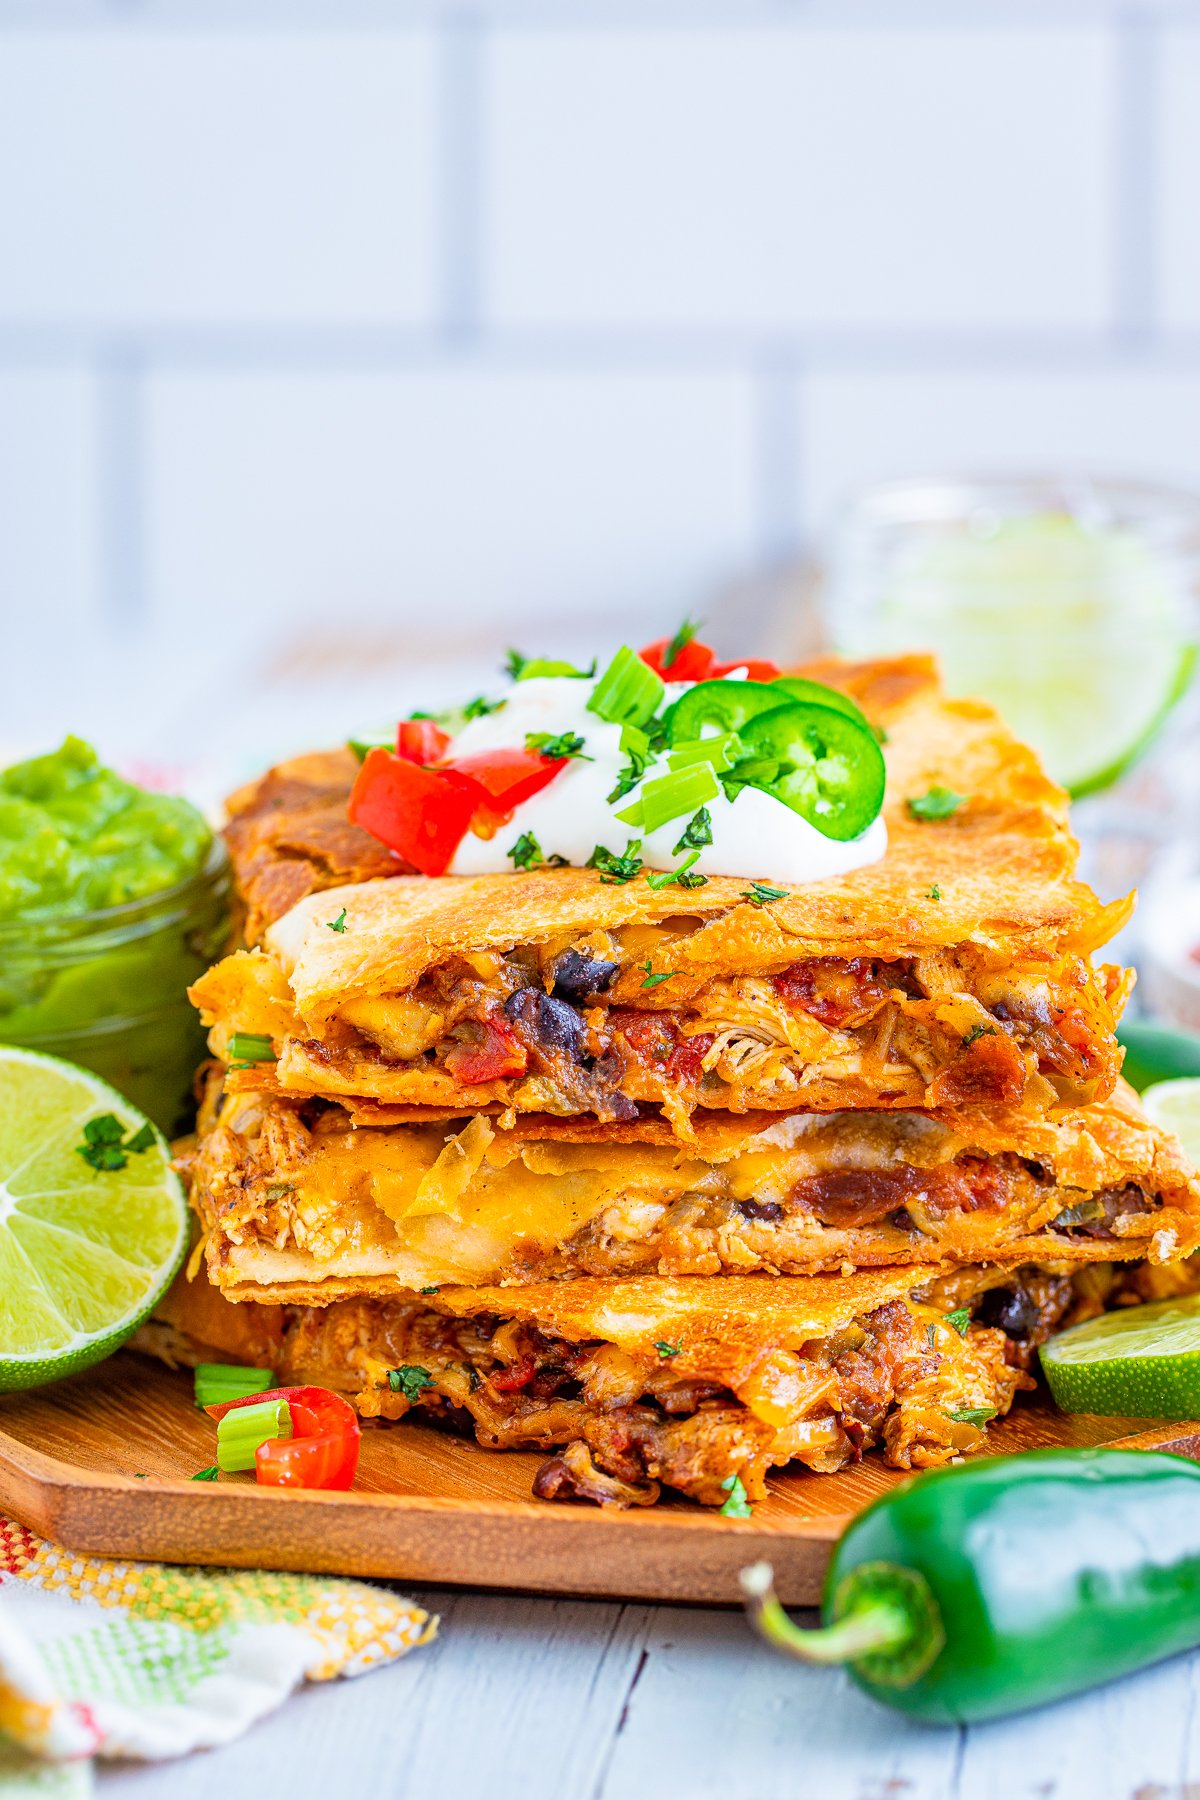 Stacked Chicken Quesadilla with toppings.